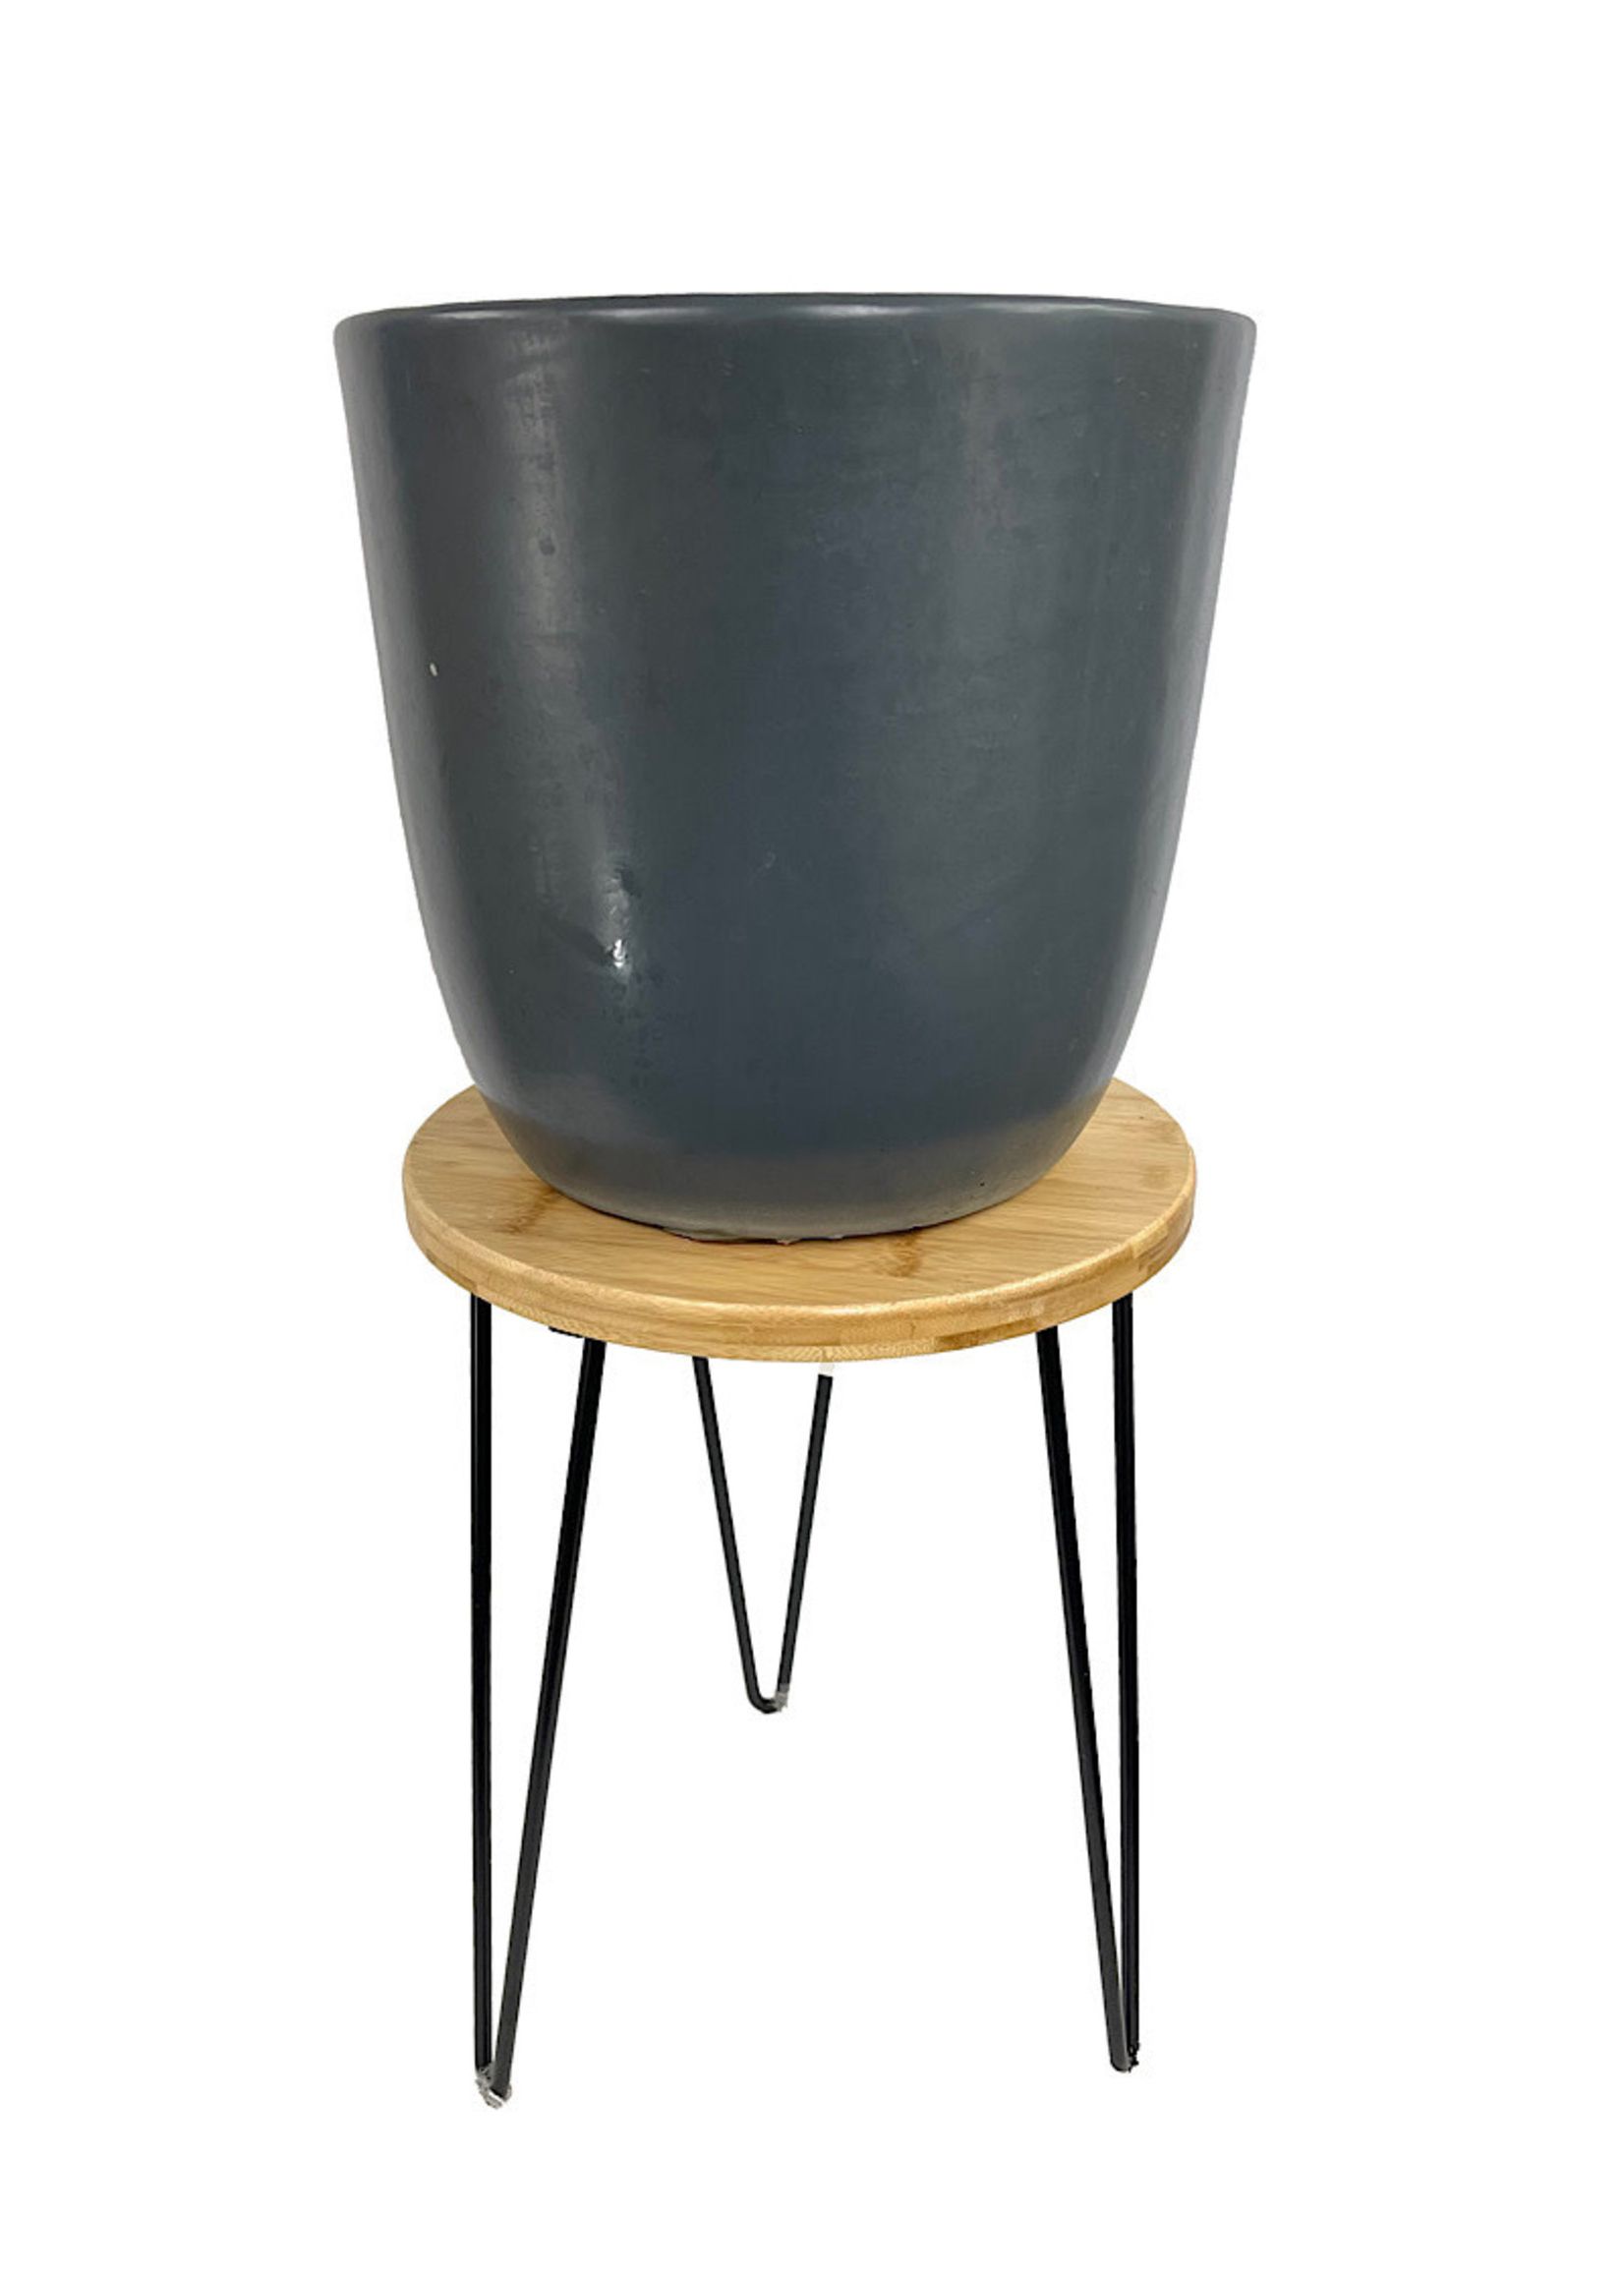 16 Inch Plant Stands For Well Known Wire And Bamboo Wood Plant Stand 16 Inch – The Garden Corner (View 1 of 15)